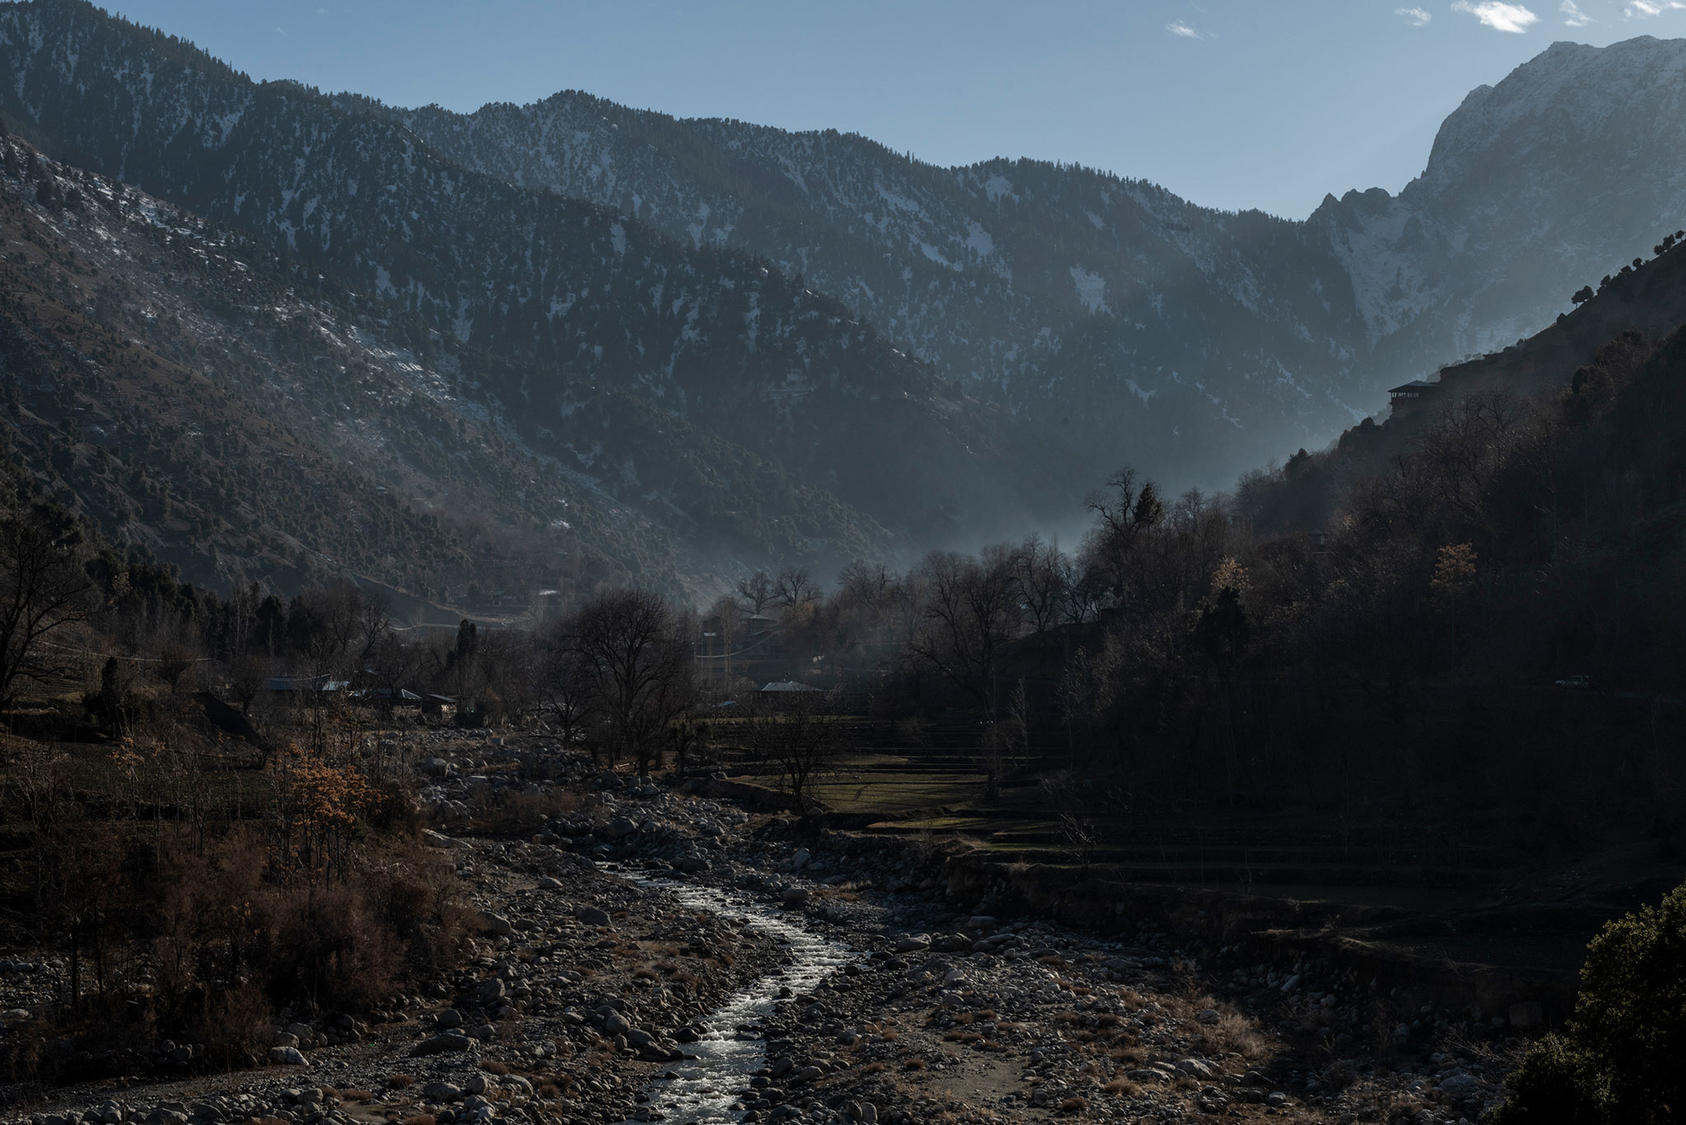 The Bumboret Kalash Valley entrance in northern Pakistan, near the border with Afghanistan. Analysts say that the Taliban takeover has sparked a spike in terror attacks that have put Islamabad in a difficult position. (Rebecca Conway/The New York Times)